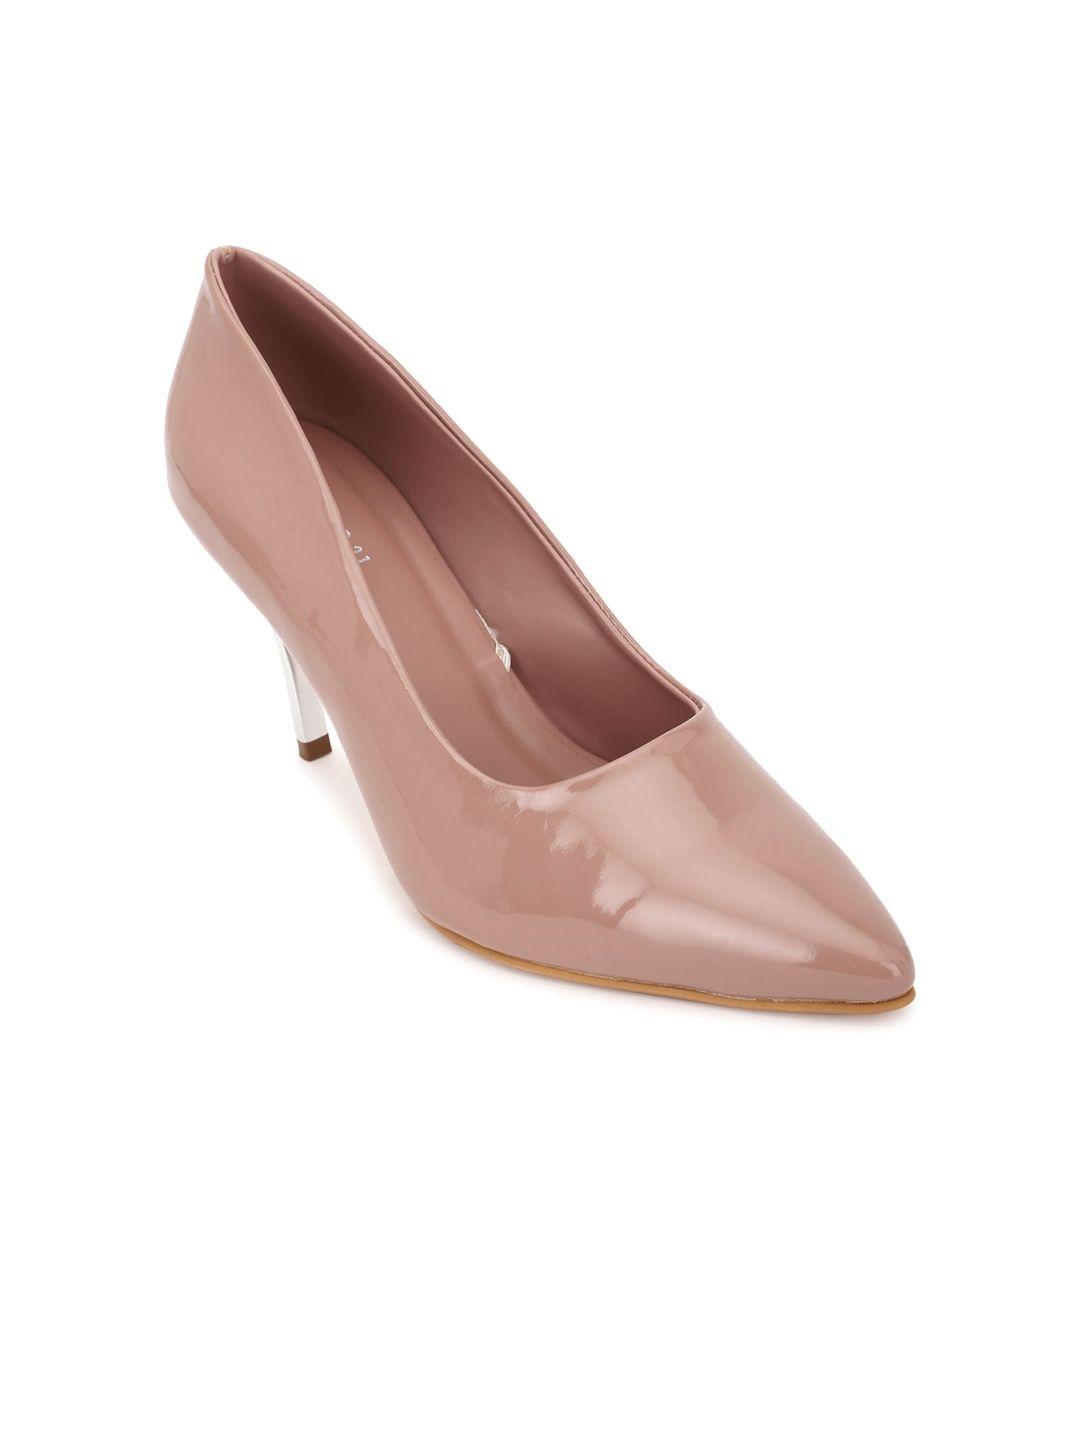 forever 21 brown pumps